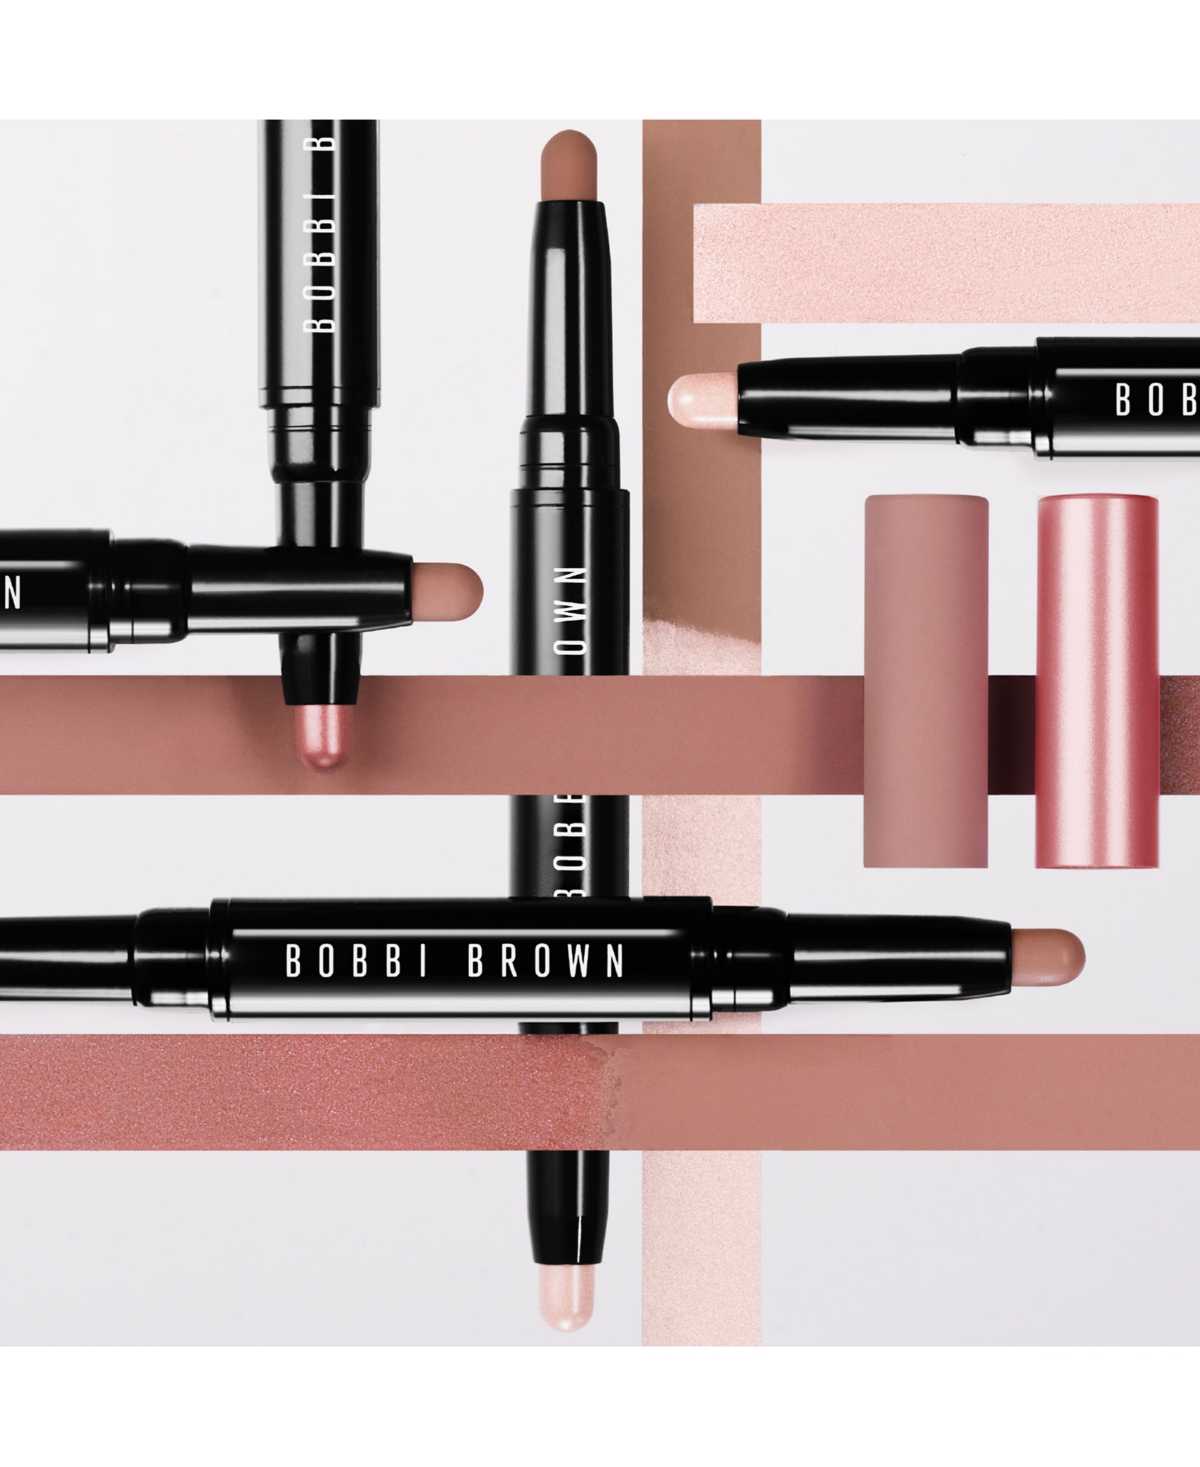 Shop Bobbi Brown Dual-ended Long-wear Cream Shadow Stick In Golden Pink,taupe